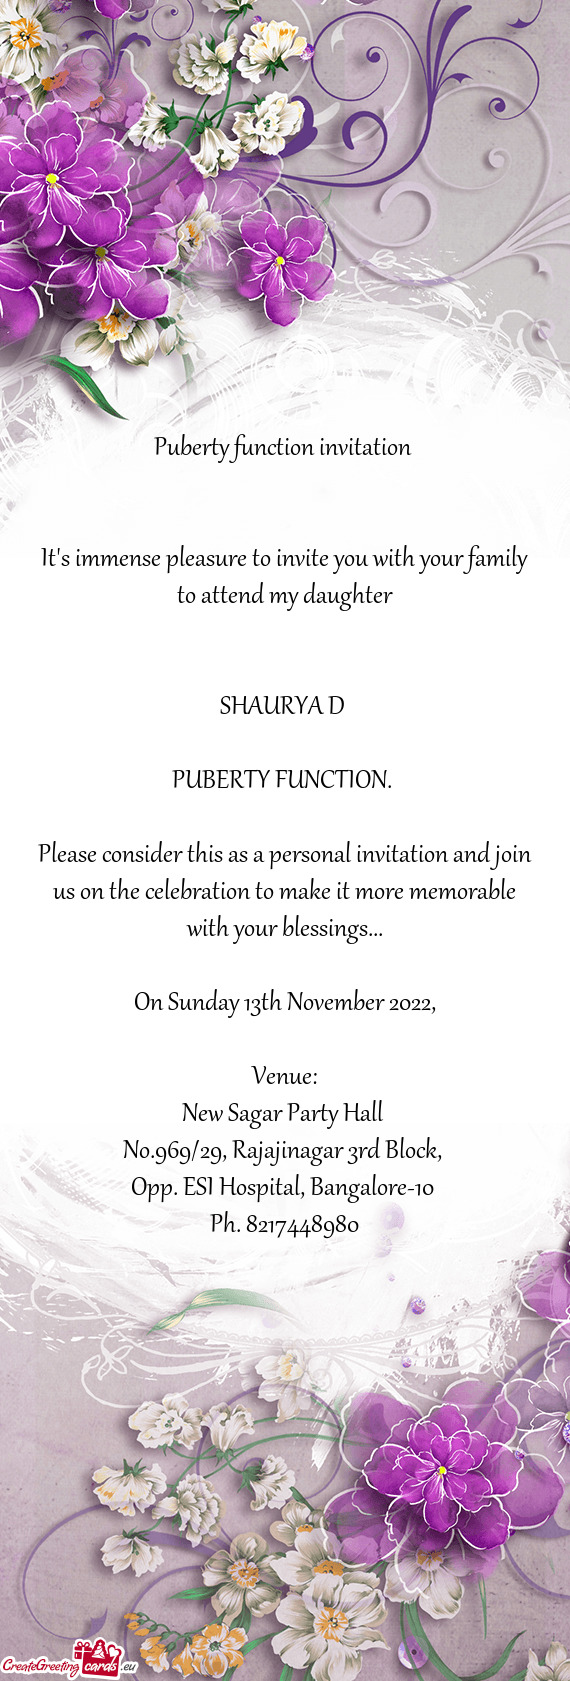 It's immense pleasure to invite you with your family to attend my daughter